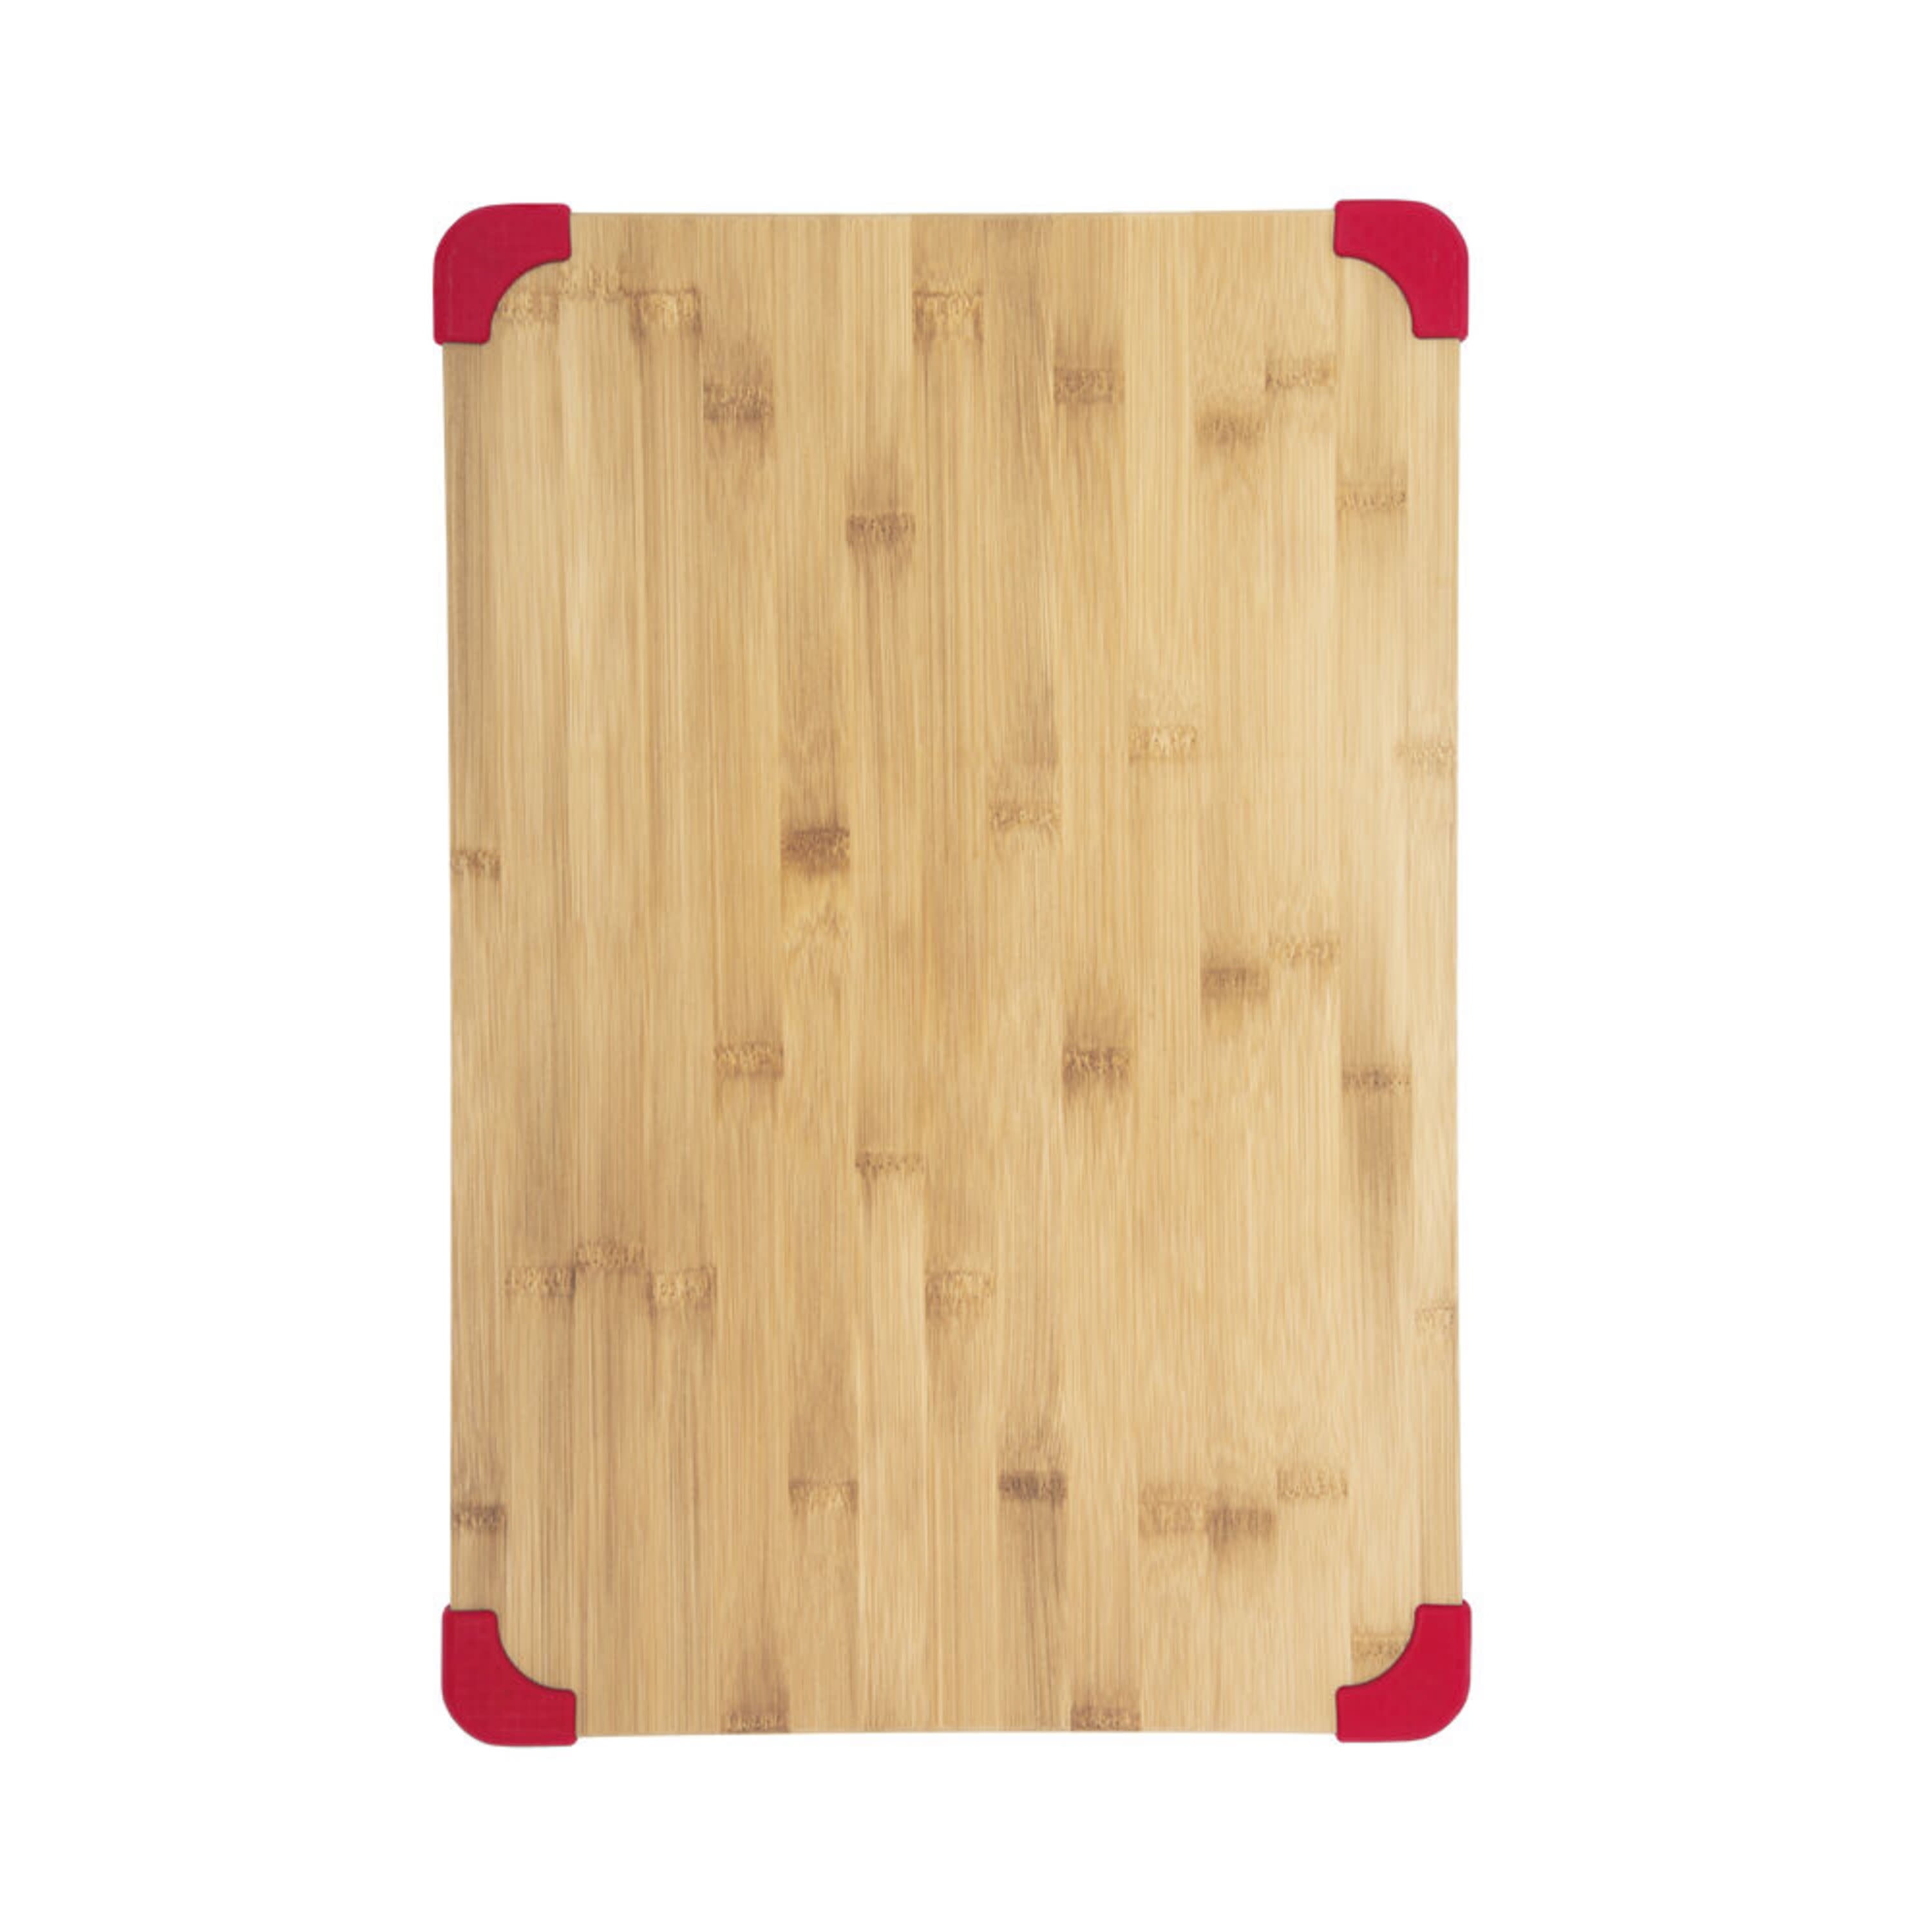 Farberware 12-inch by 18-inch Thick Bamboo Wood Cutting Board with Non-Slip Red Corners